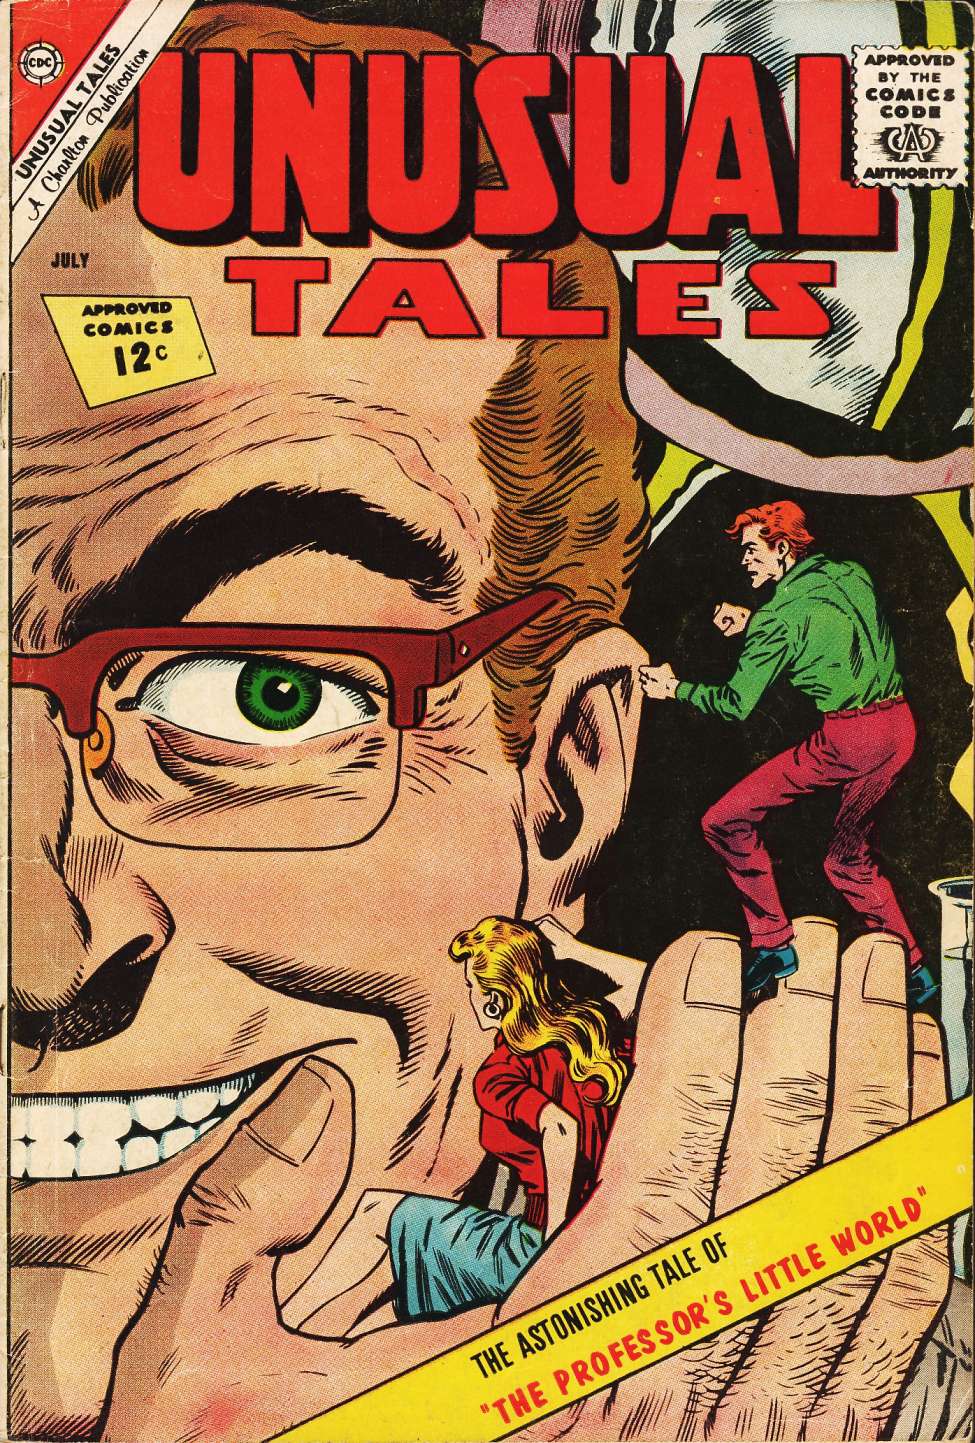 Book Cover For Unusual Tales 34